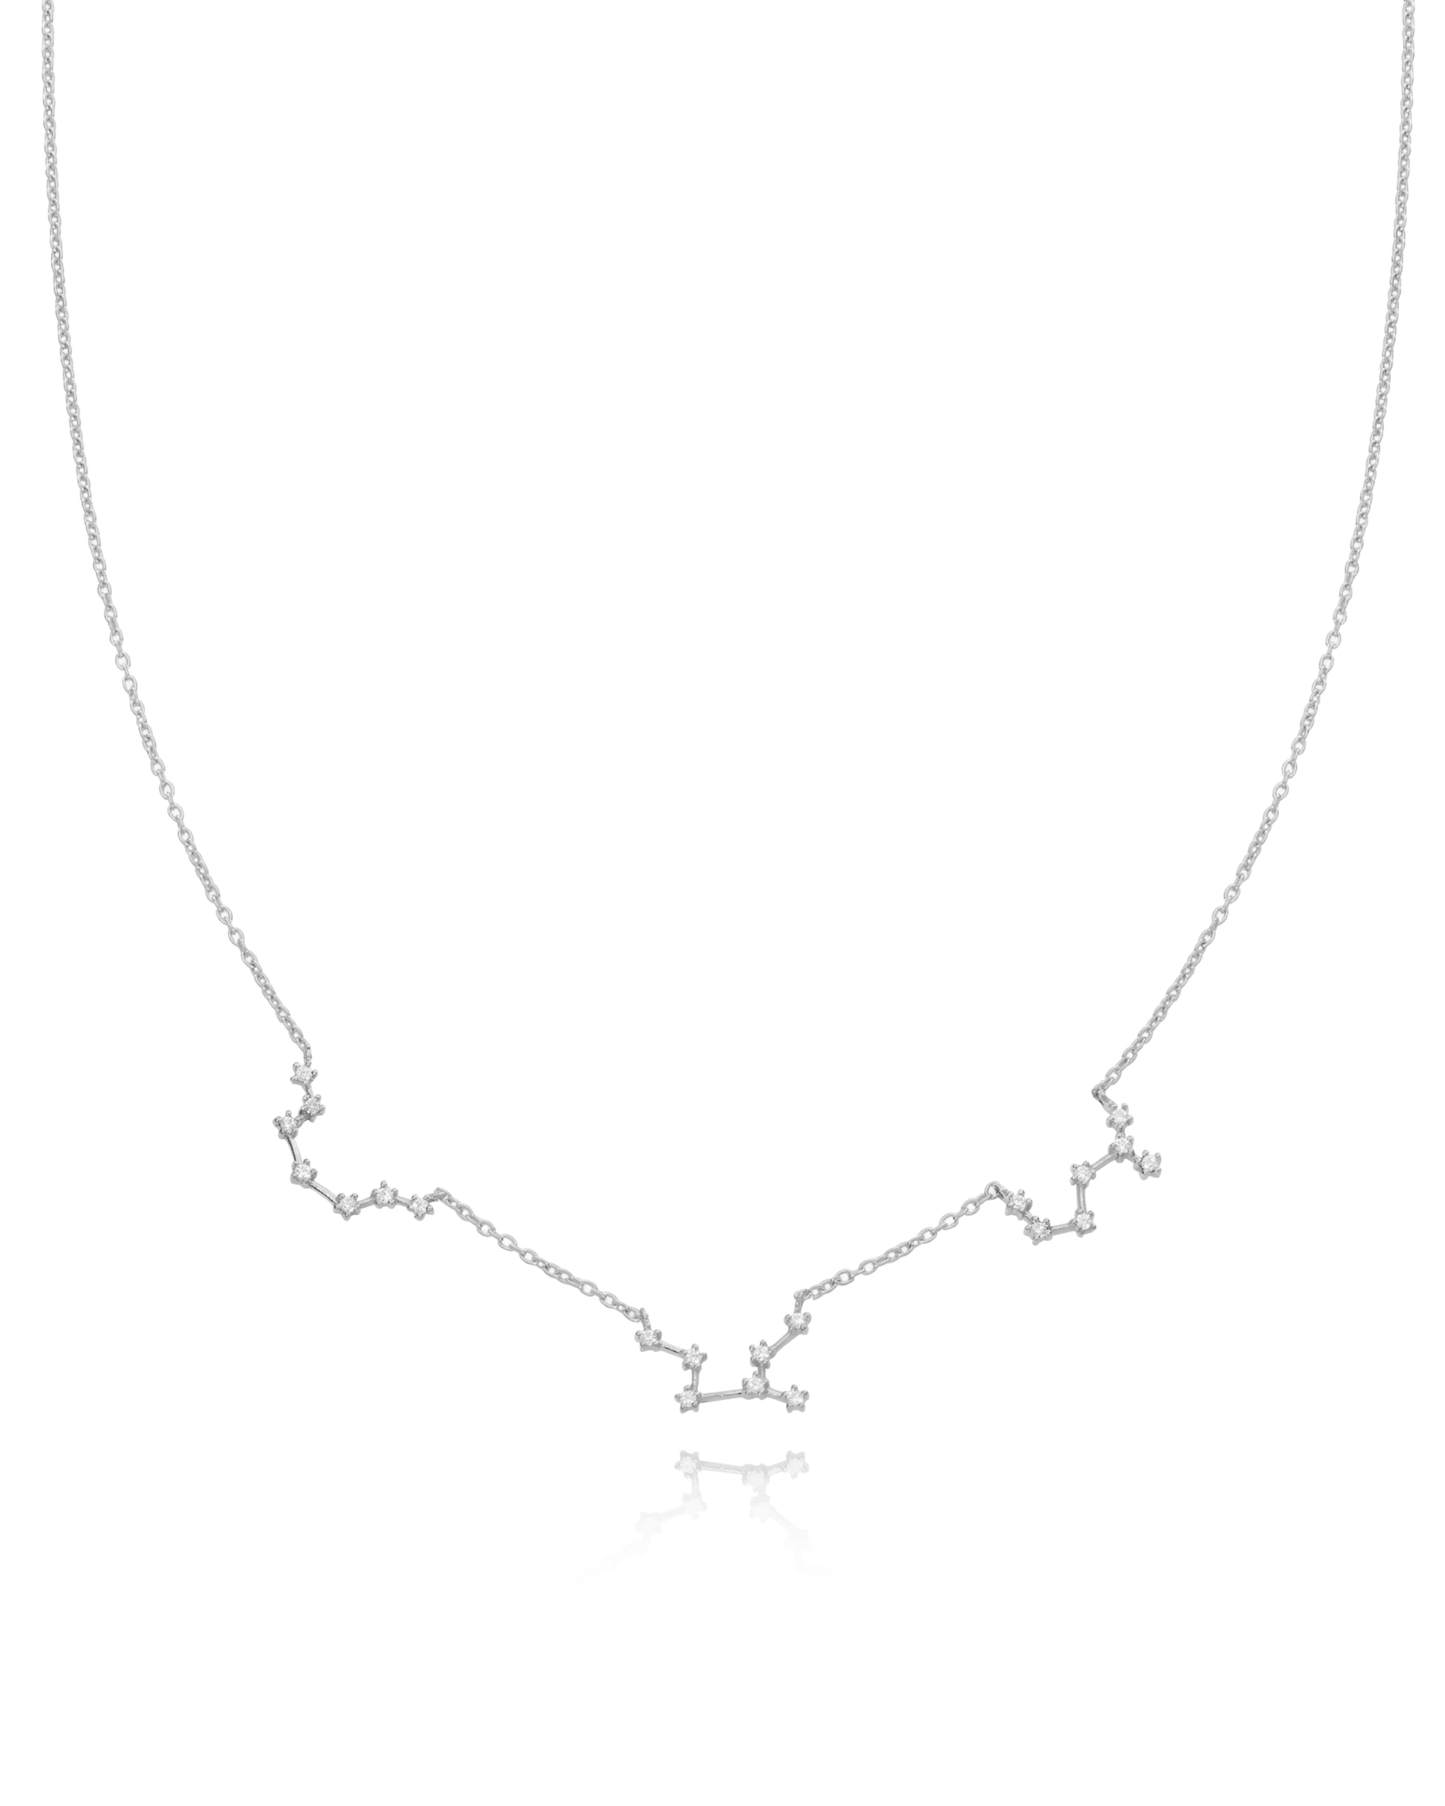 Constellation Necklace with Diamonds - 925 Sterling Silver Necklaces magal-dev 1 Constellation 16" 